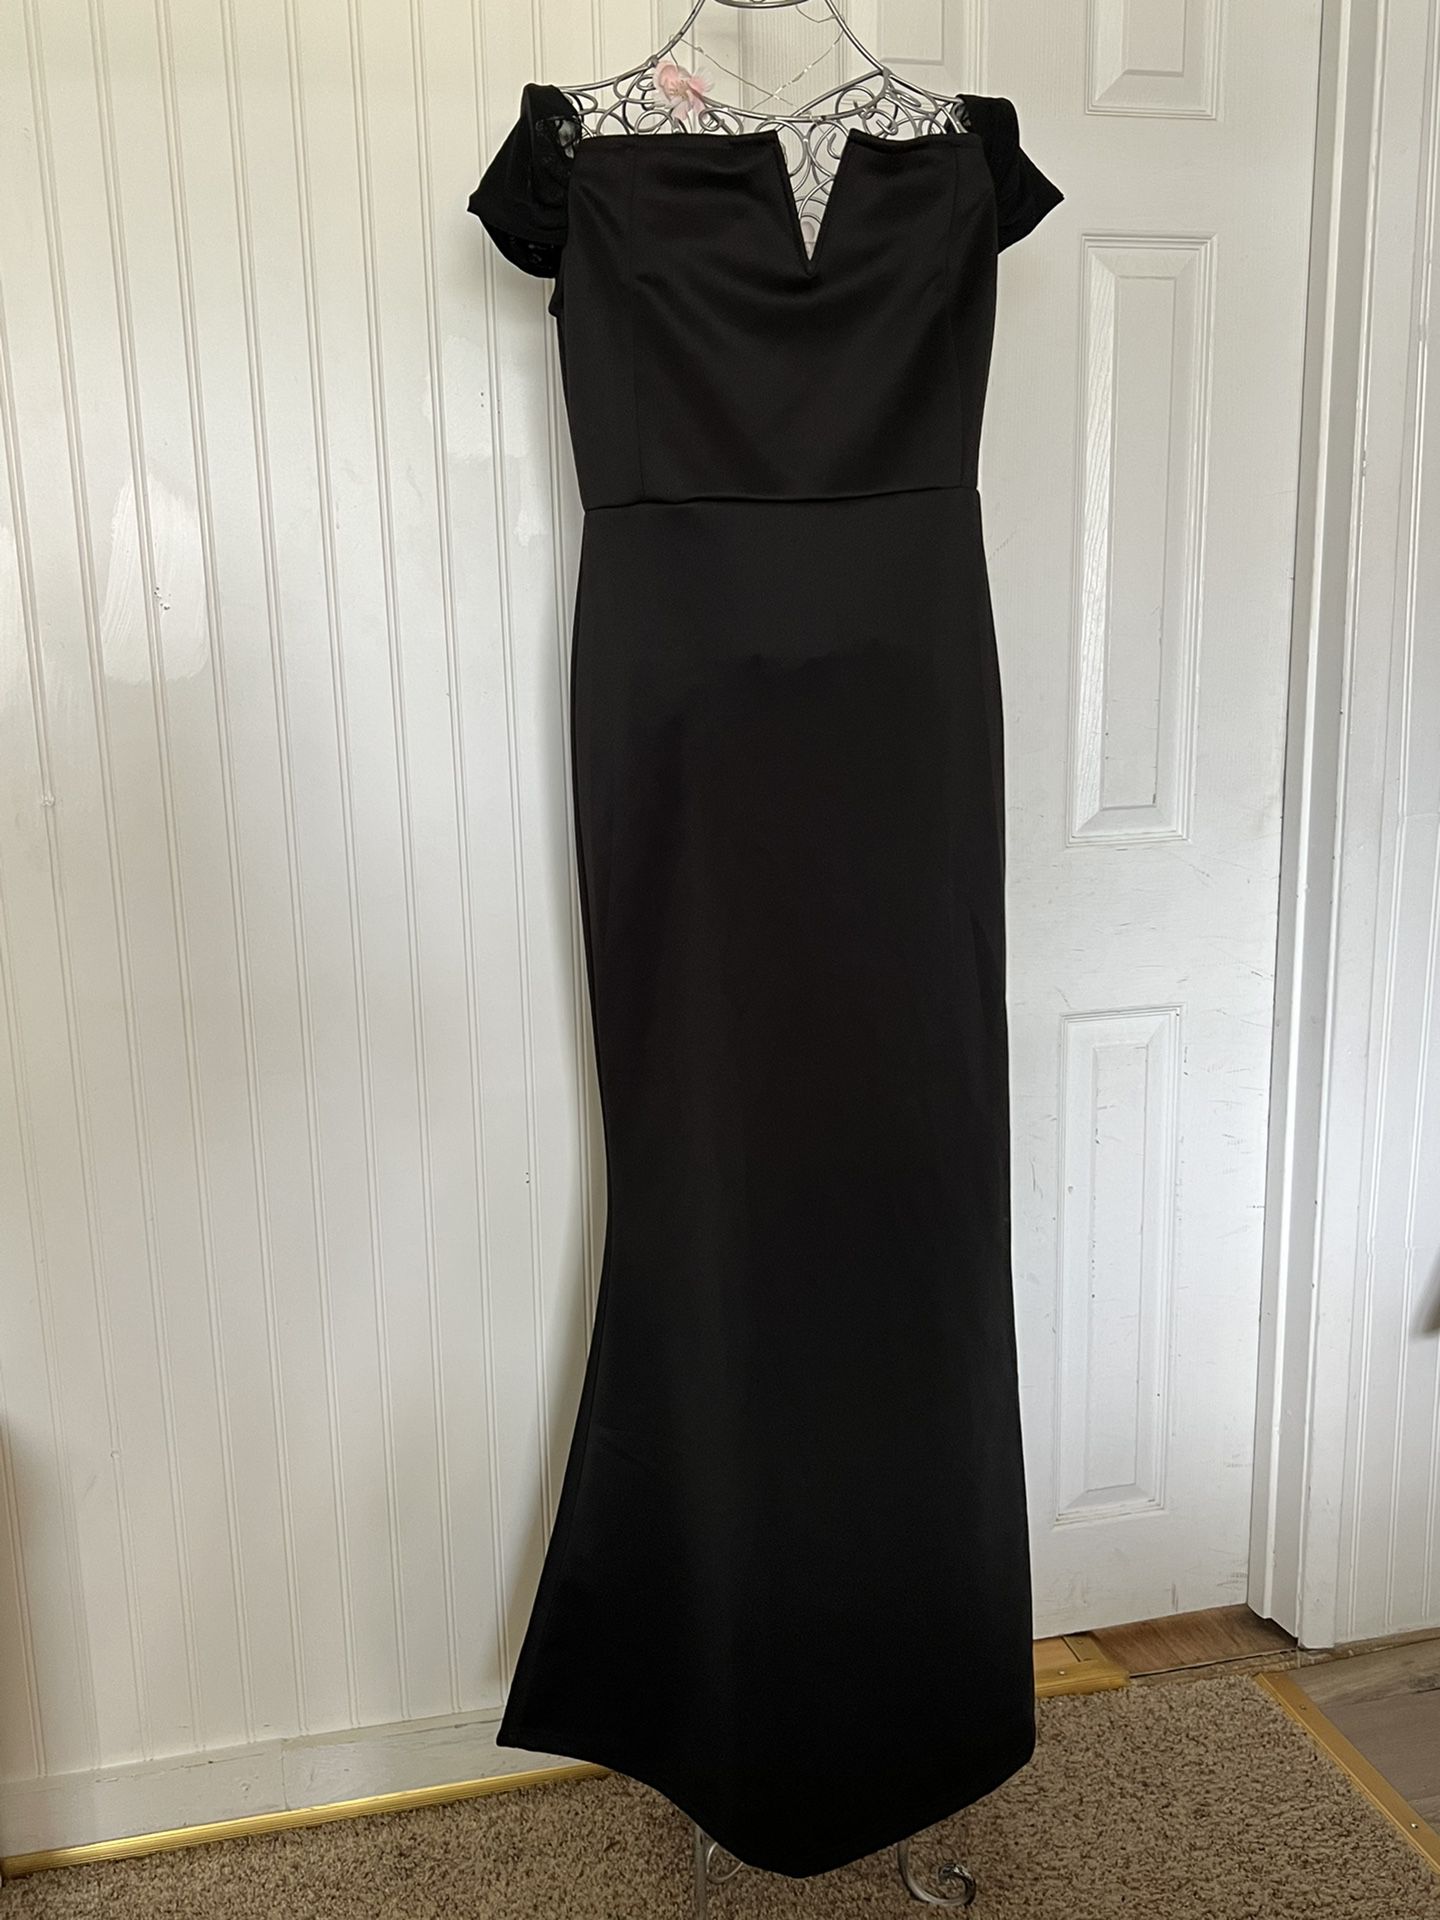 Beautiful black dress. Size is XL but fits perfectly on an M very reduced but does stretch